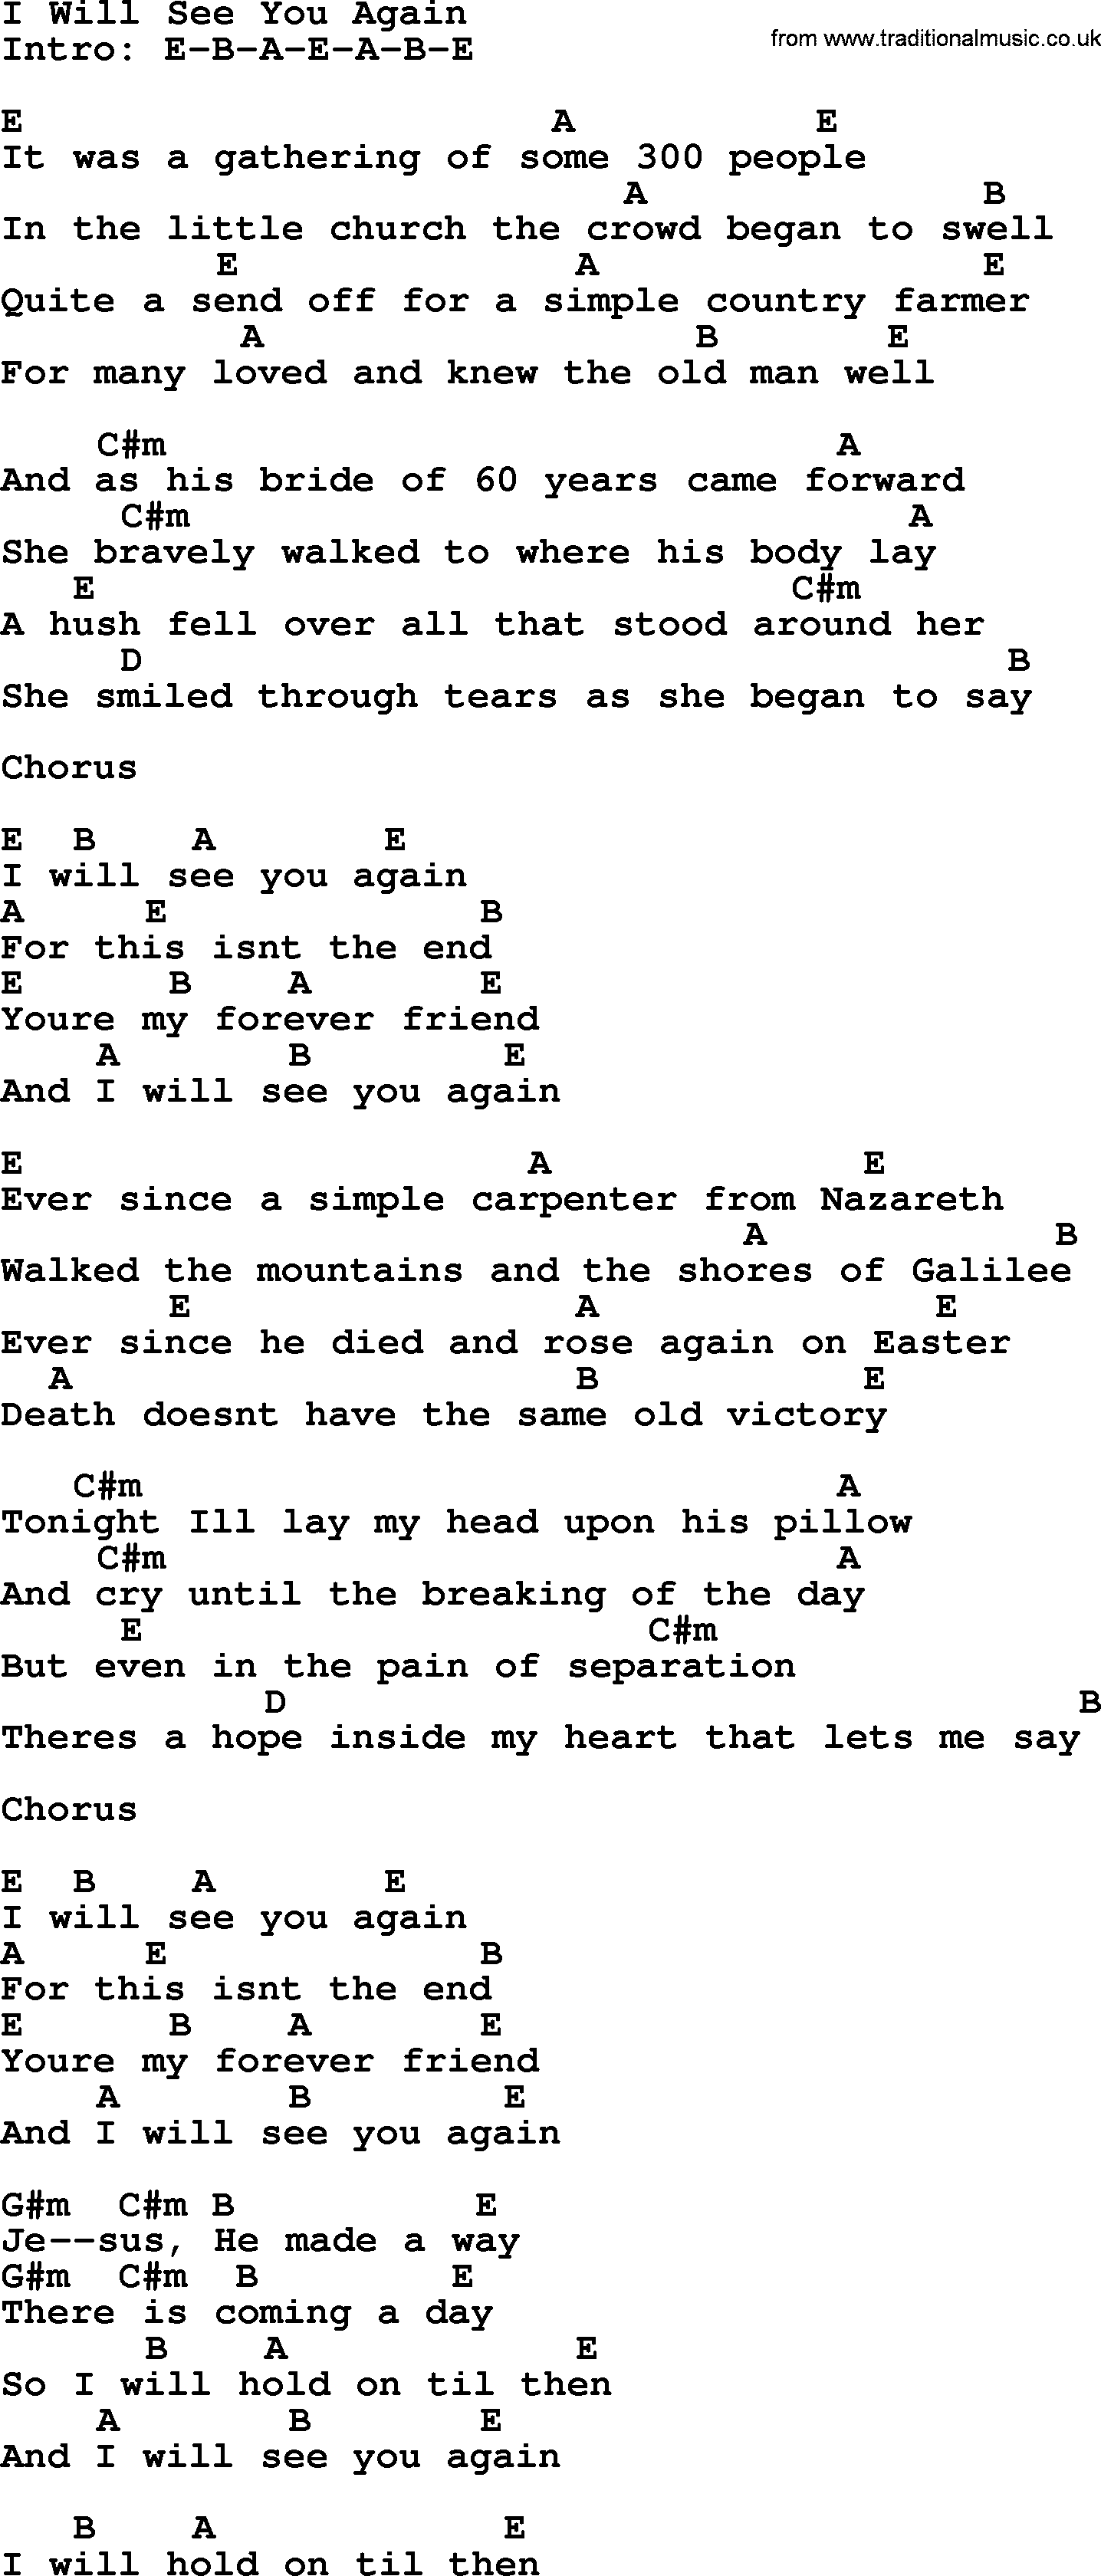 Bluegrass song: I Will See You Again, lyrics and chords